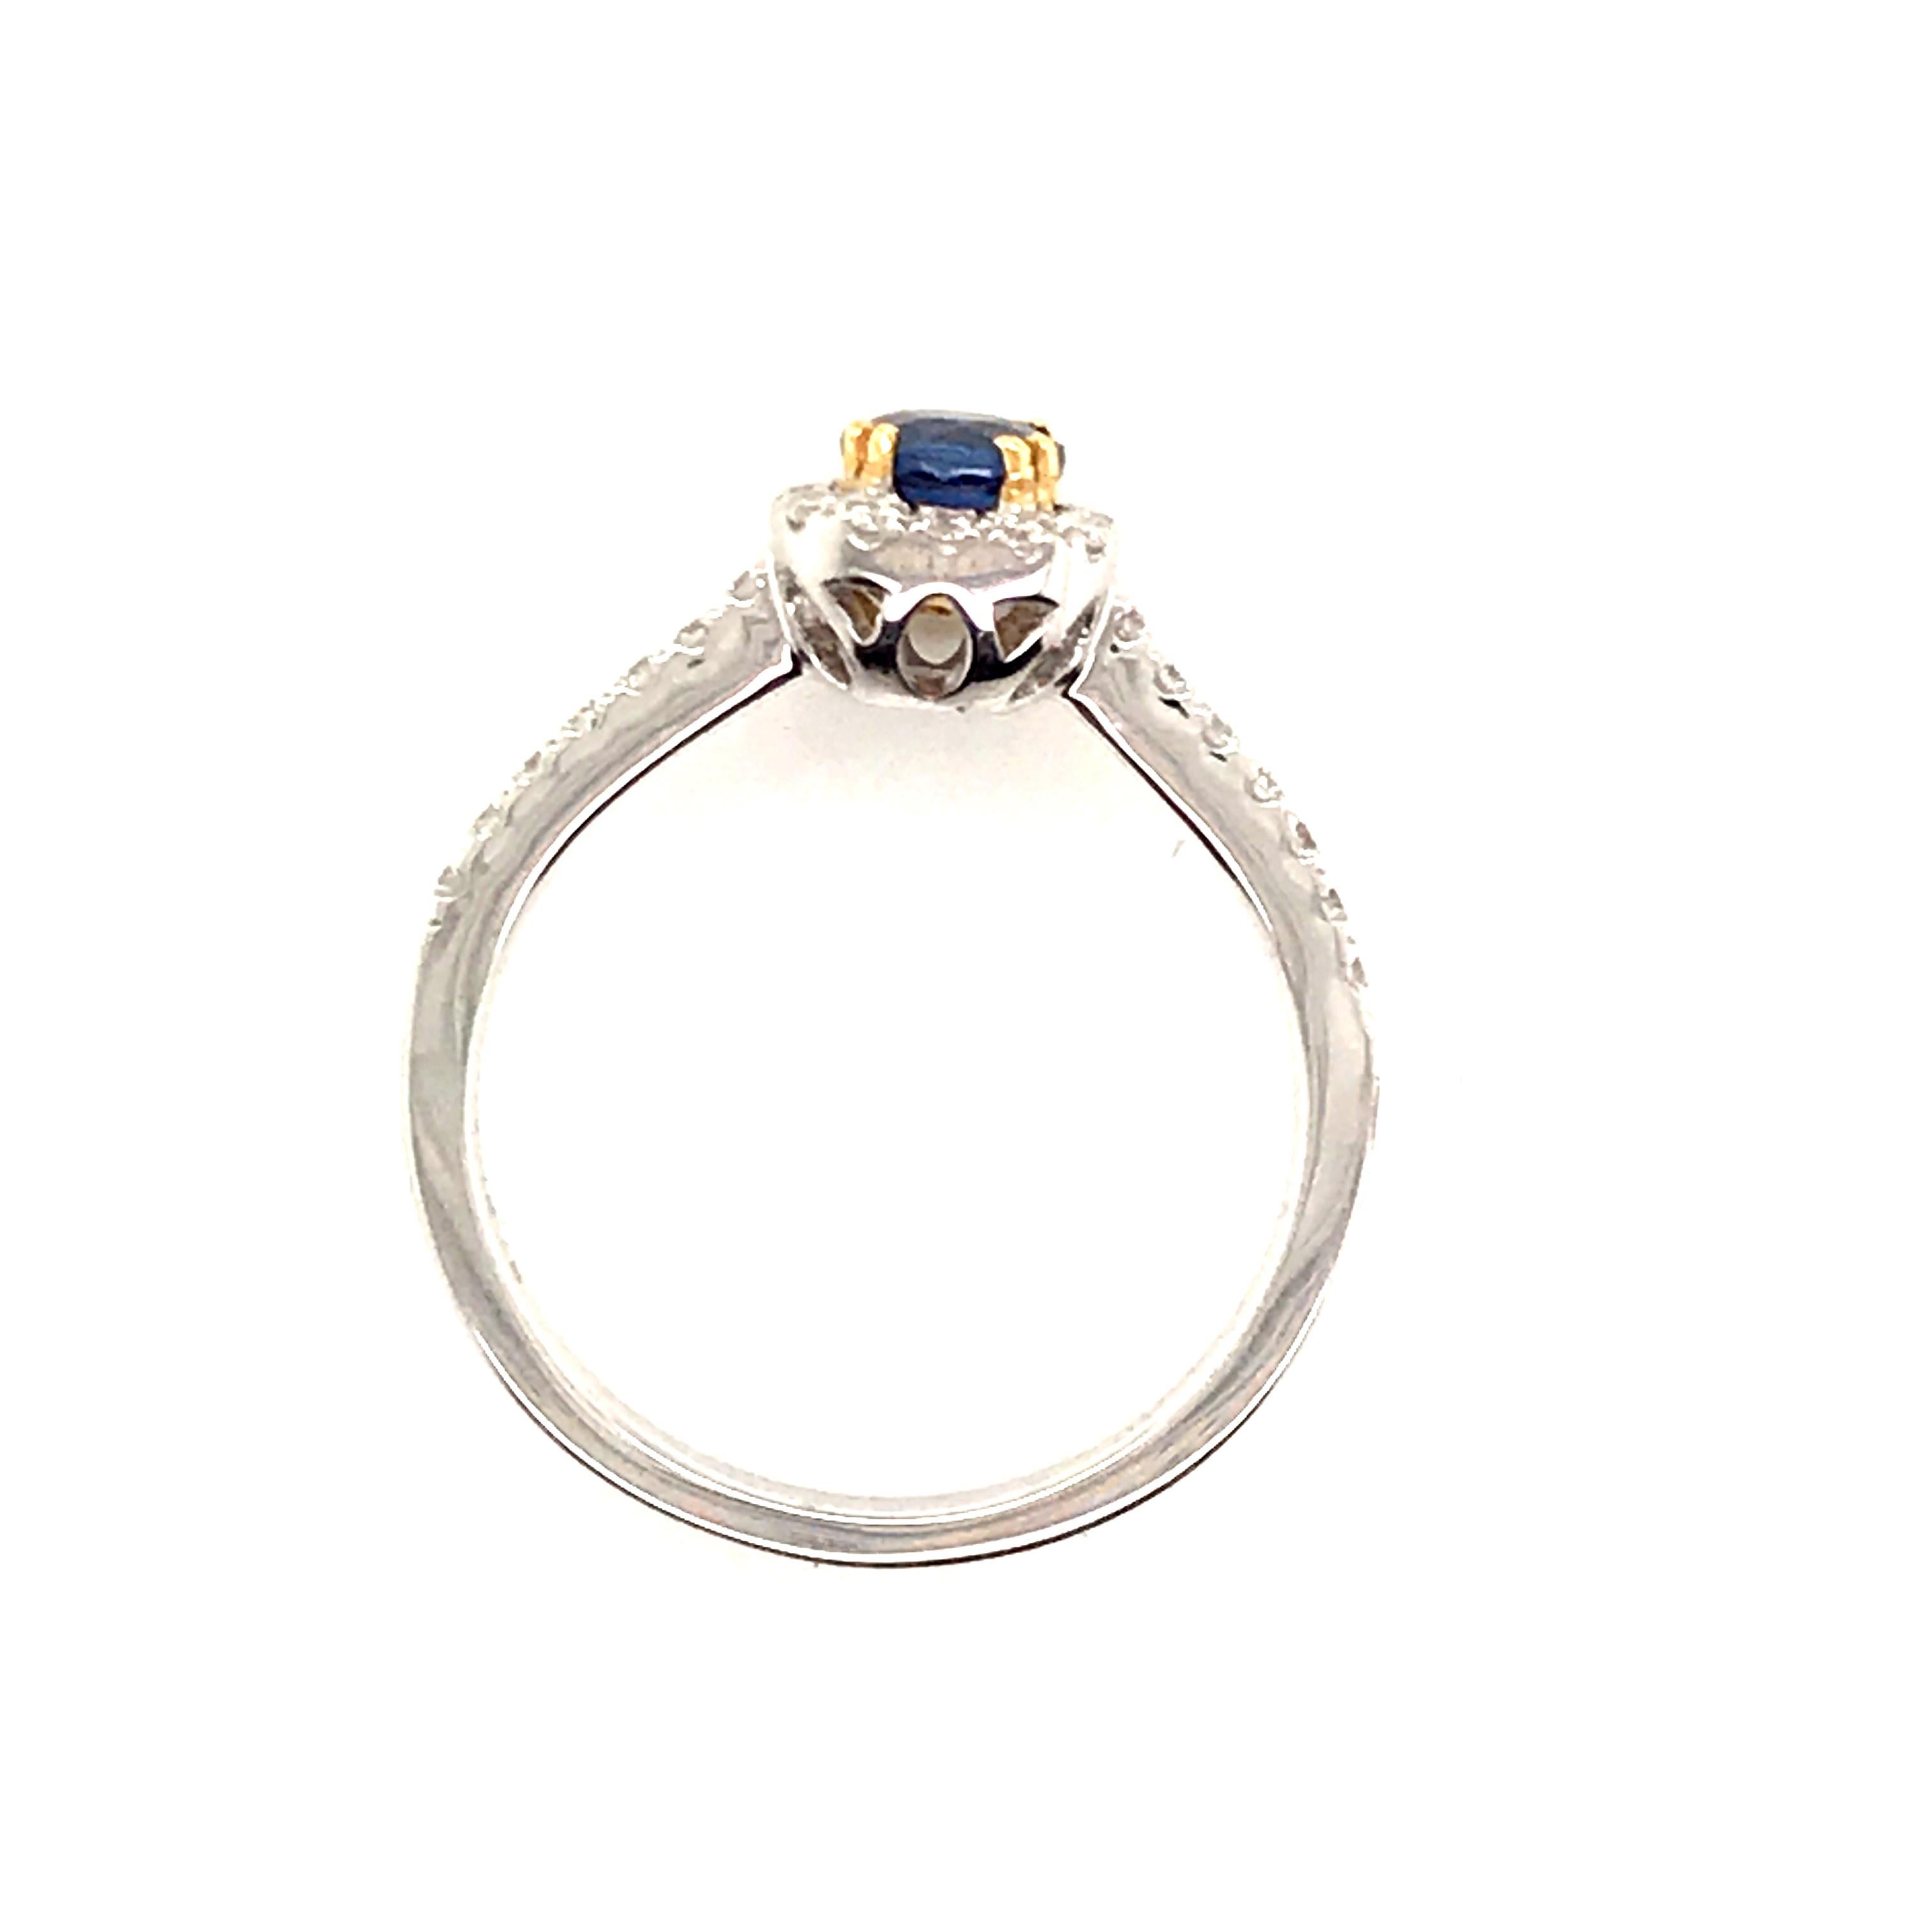 HJN Inc. Ring featuring a Natural Sapphire with Diamond Halo Ring

Sapphire Weight: 0.65 Carats 
Round-Cut Diamond Weight: 0.29 Carats 

Clarity Grade: SI1 
Color Grade: G
Polish and Symmetry: Very Good
Style Number: GJ1235SDWG18K